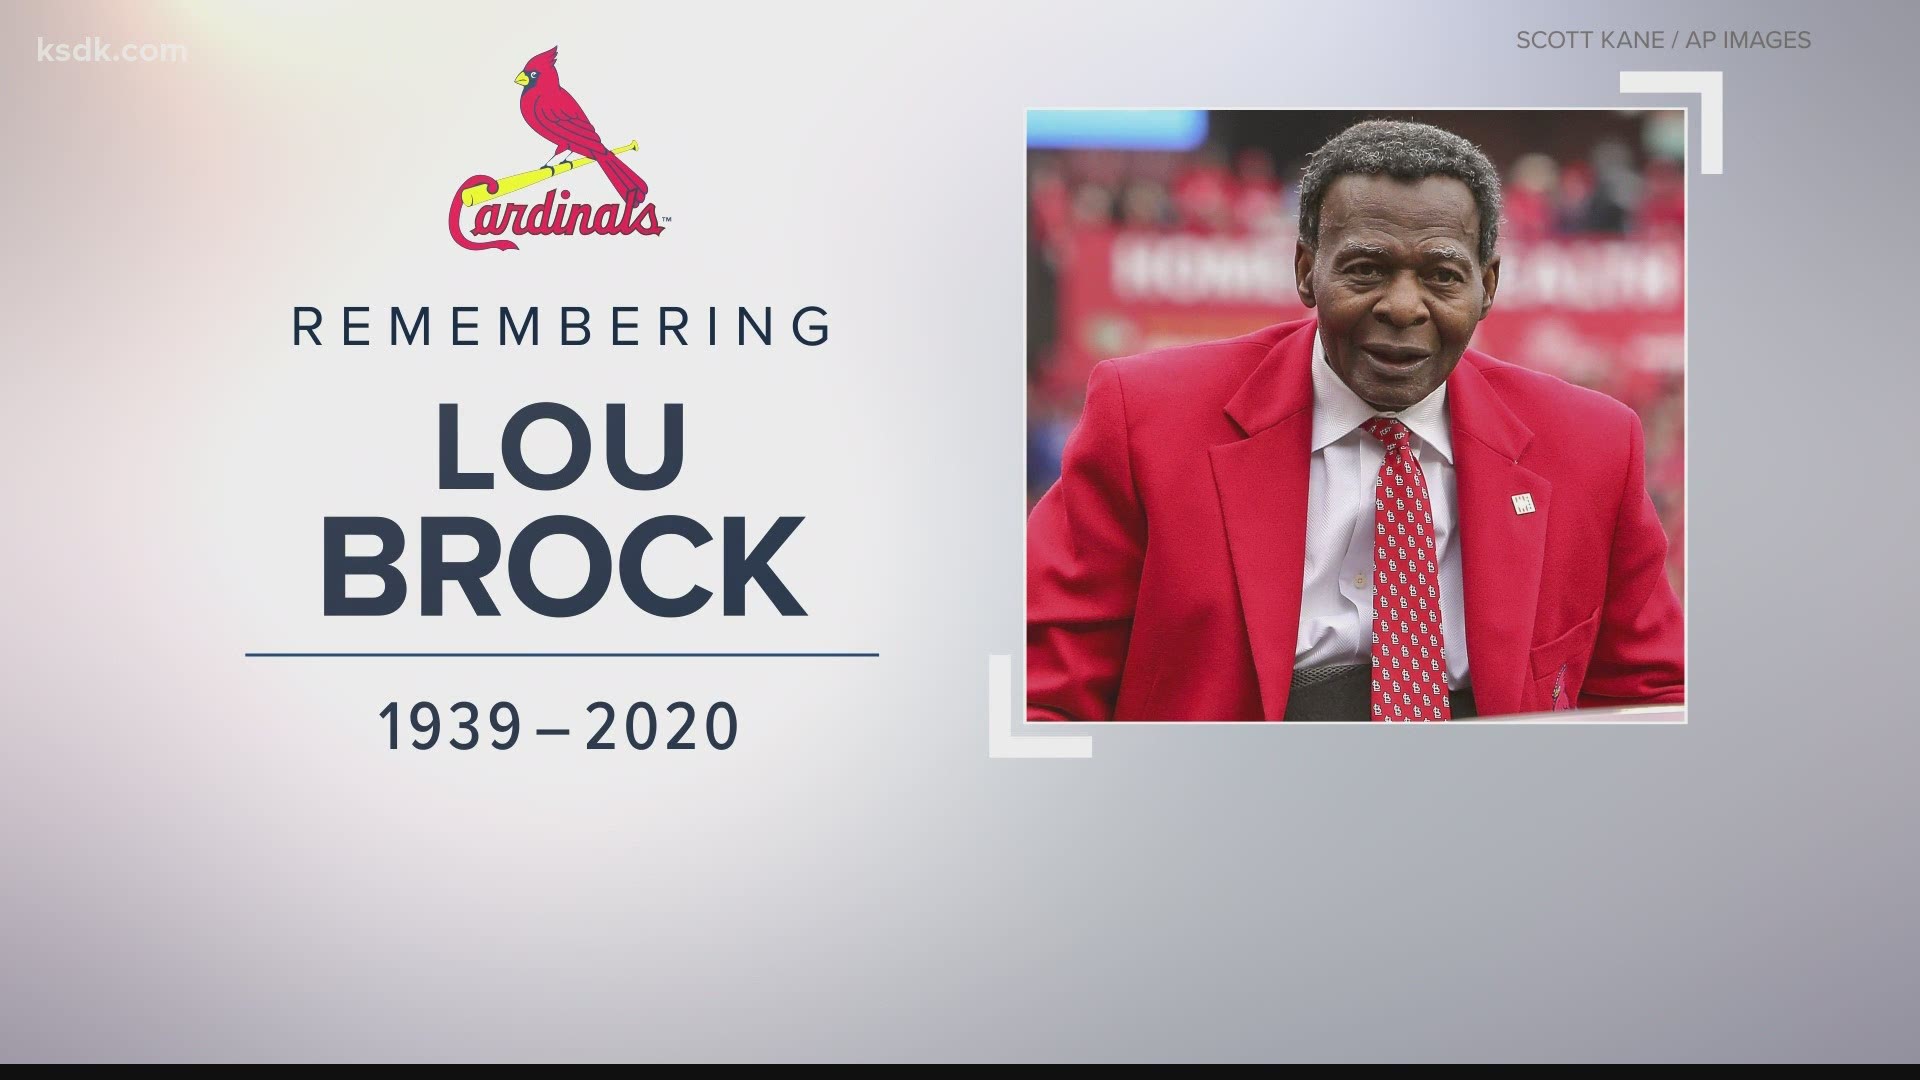 Lou Brock helped break barriers and pave the way for other black players in baseball